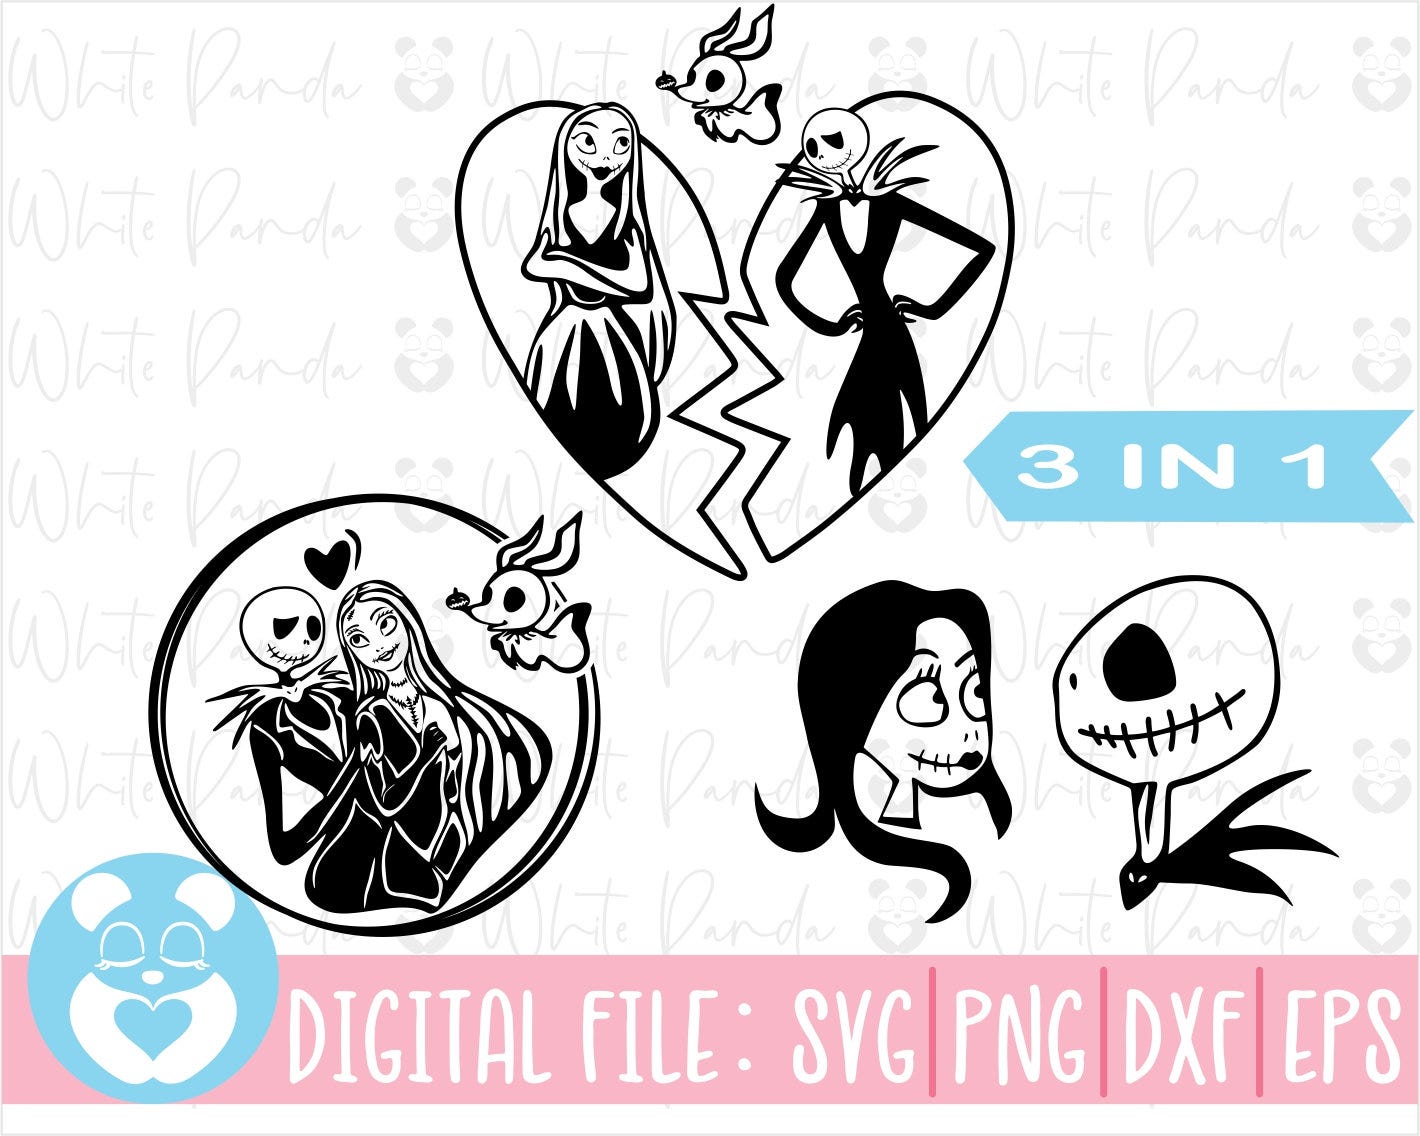 Jack and Sally Heart Svg,Jack Skellington Svg,The Nightmare Before Christmas Svg,Files for Cricut,Silhouette,Instant Download,Dxf ,Png,Svg